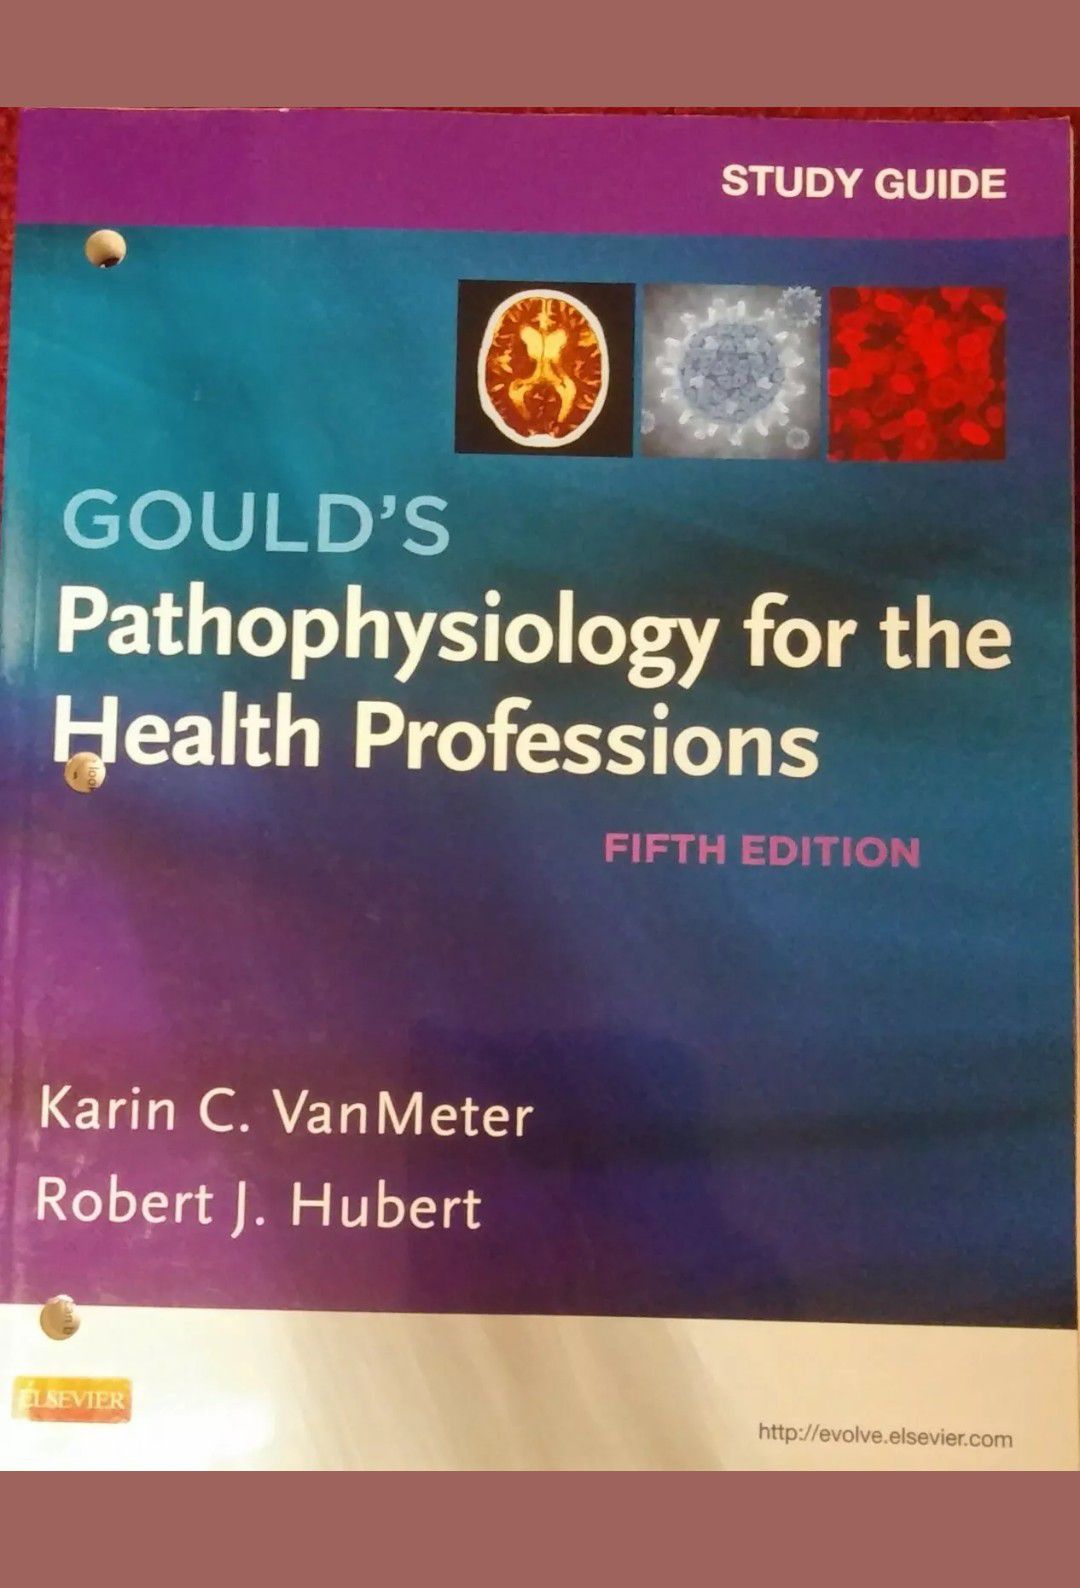 Gould's Pathophysiology for the Health Professions Study Guide 5th Edition